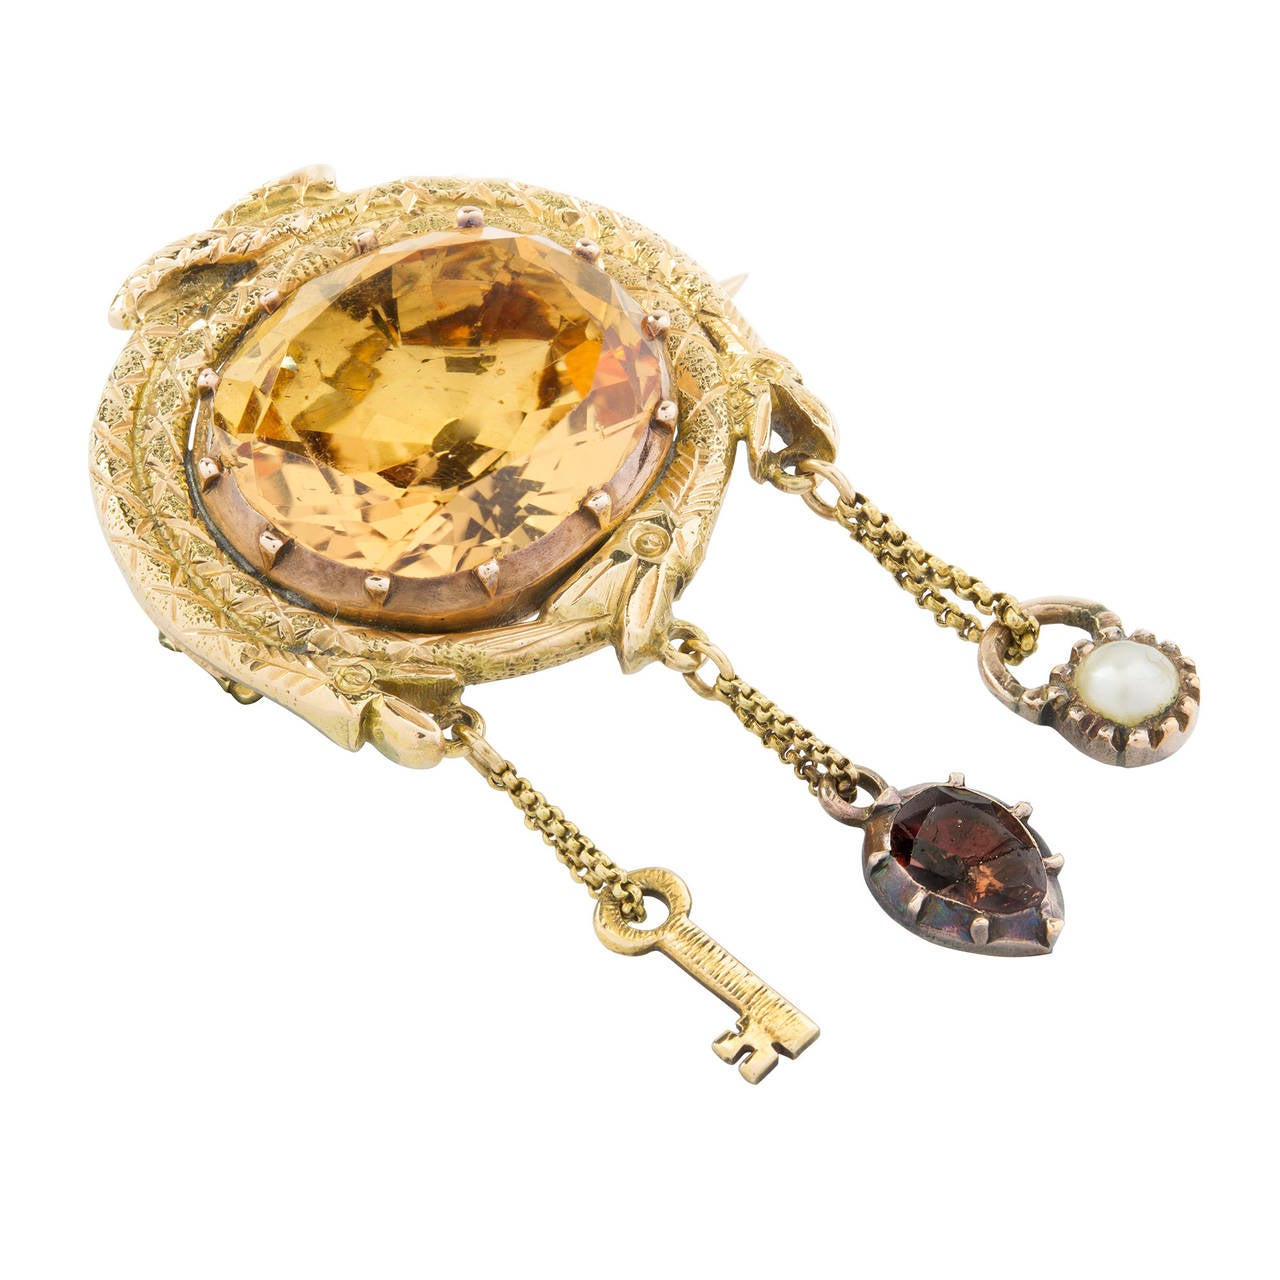 A late Georgian topaz brooch, the brooch set with a central oval-shaped faceted golden topaz, measuring approximately 13.5 x 11.7 mm, rose gold cut-down collet set to a border of entwined yellow gold serpents, suspending a pearl padlock, a yellow